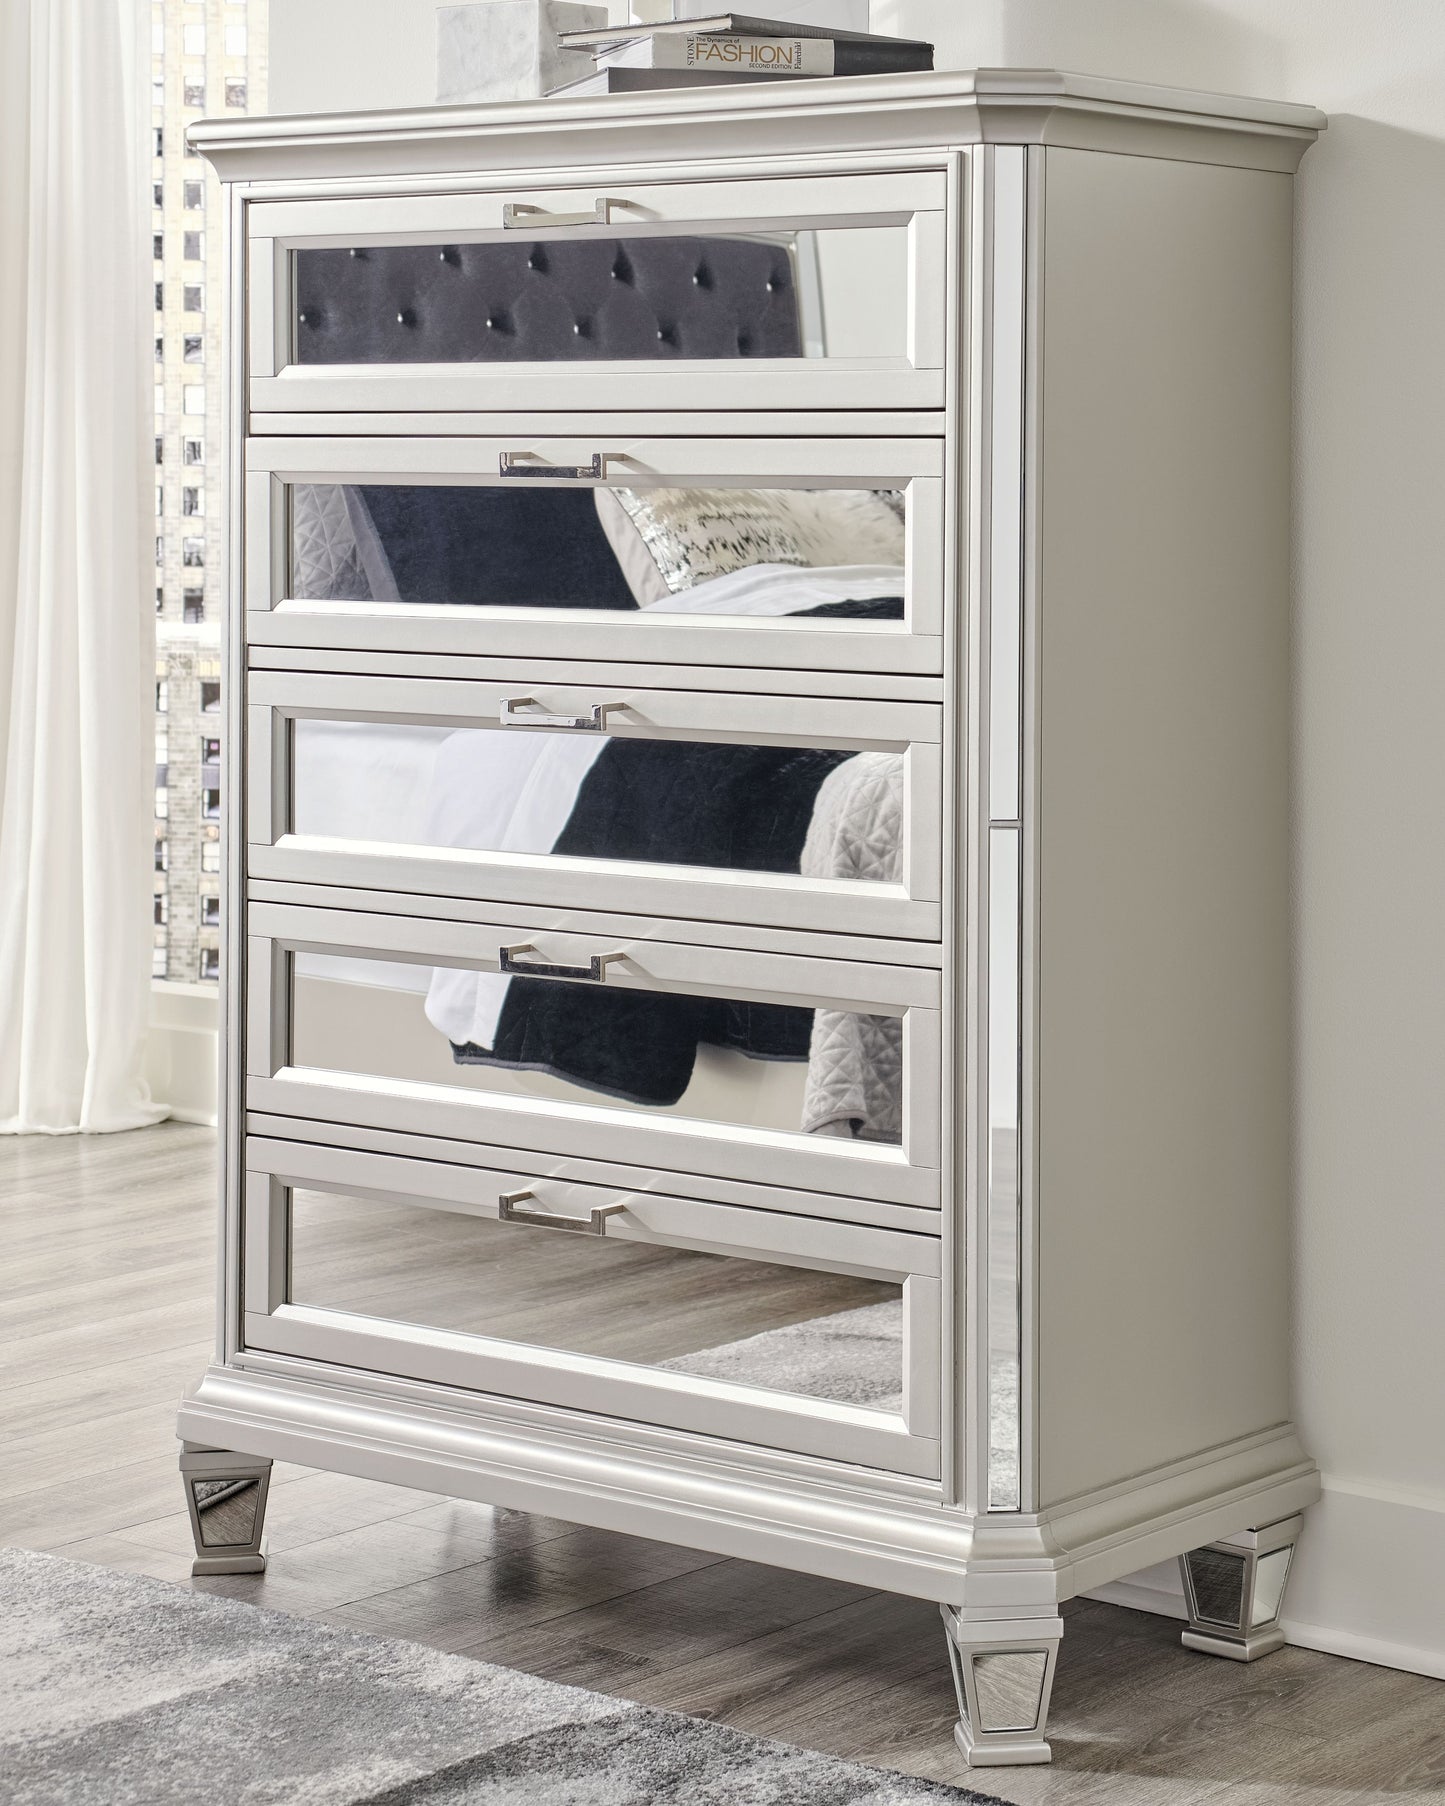 Lindenfield - Silver - Five Drawer Chest